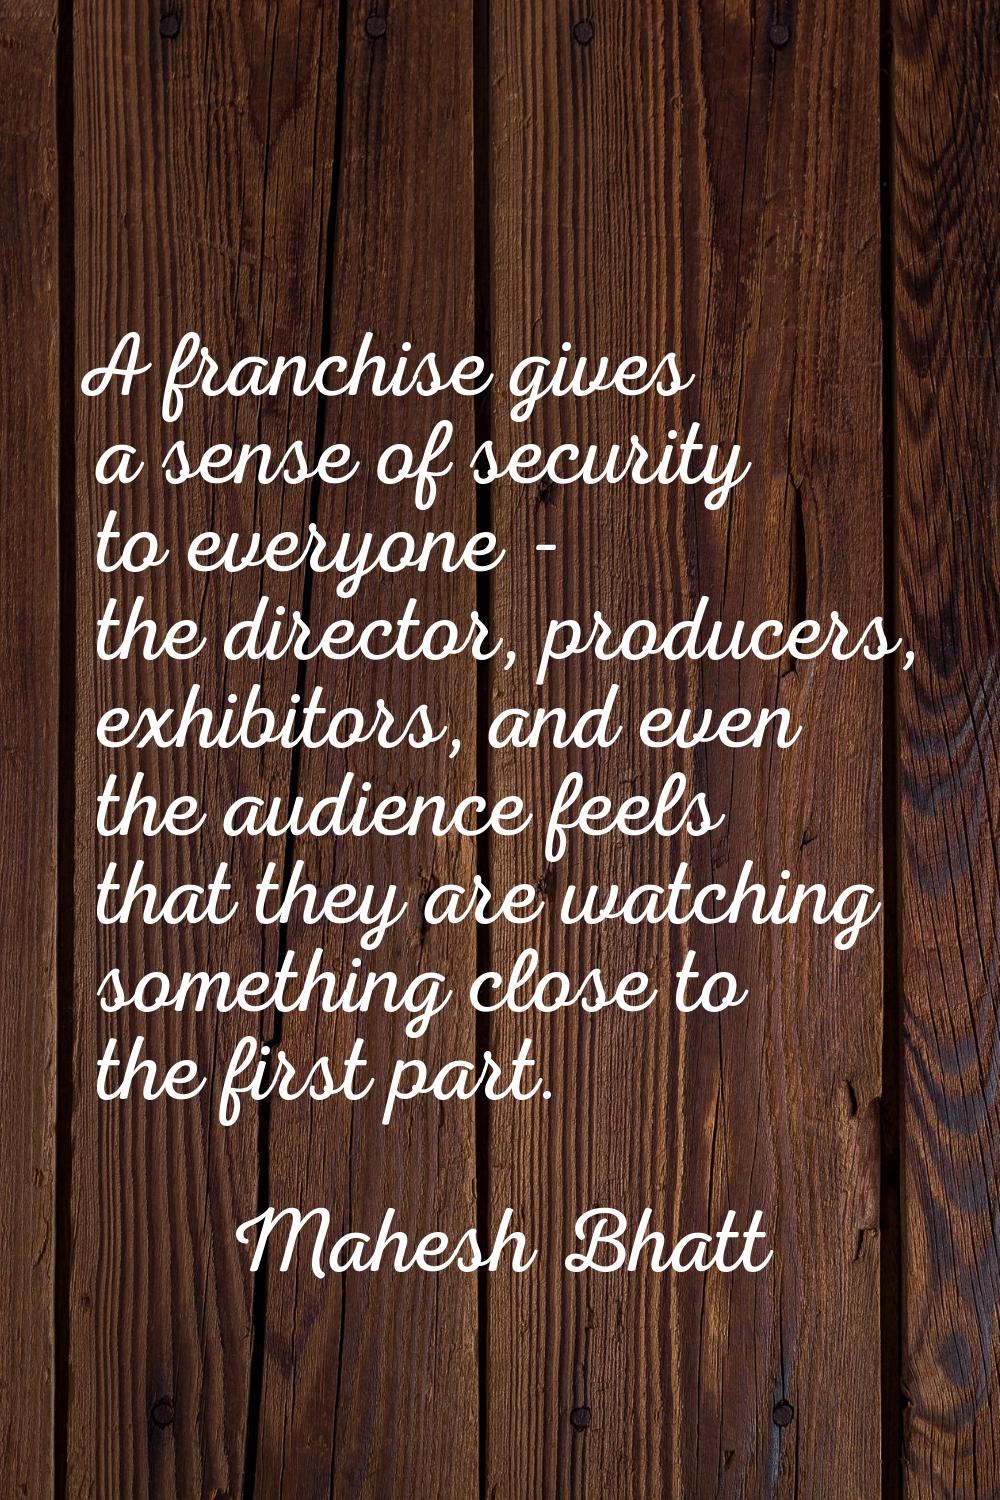 A franchise gives a sense of security to everyone - the director, producers, exhibitors, and even t